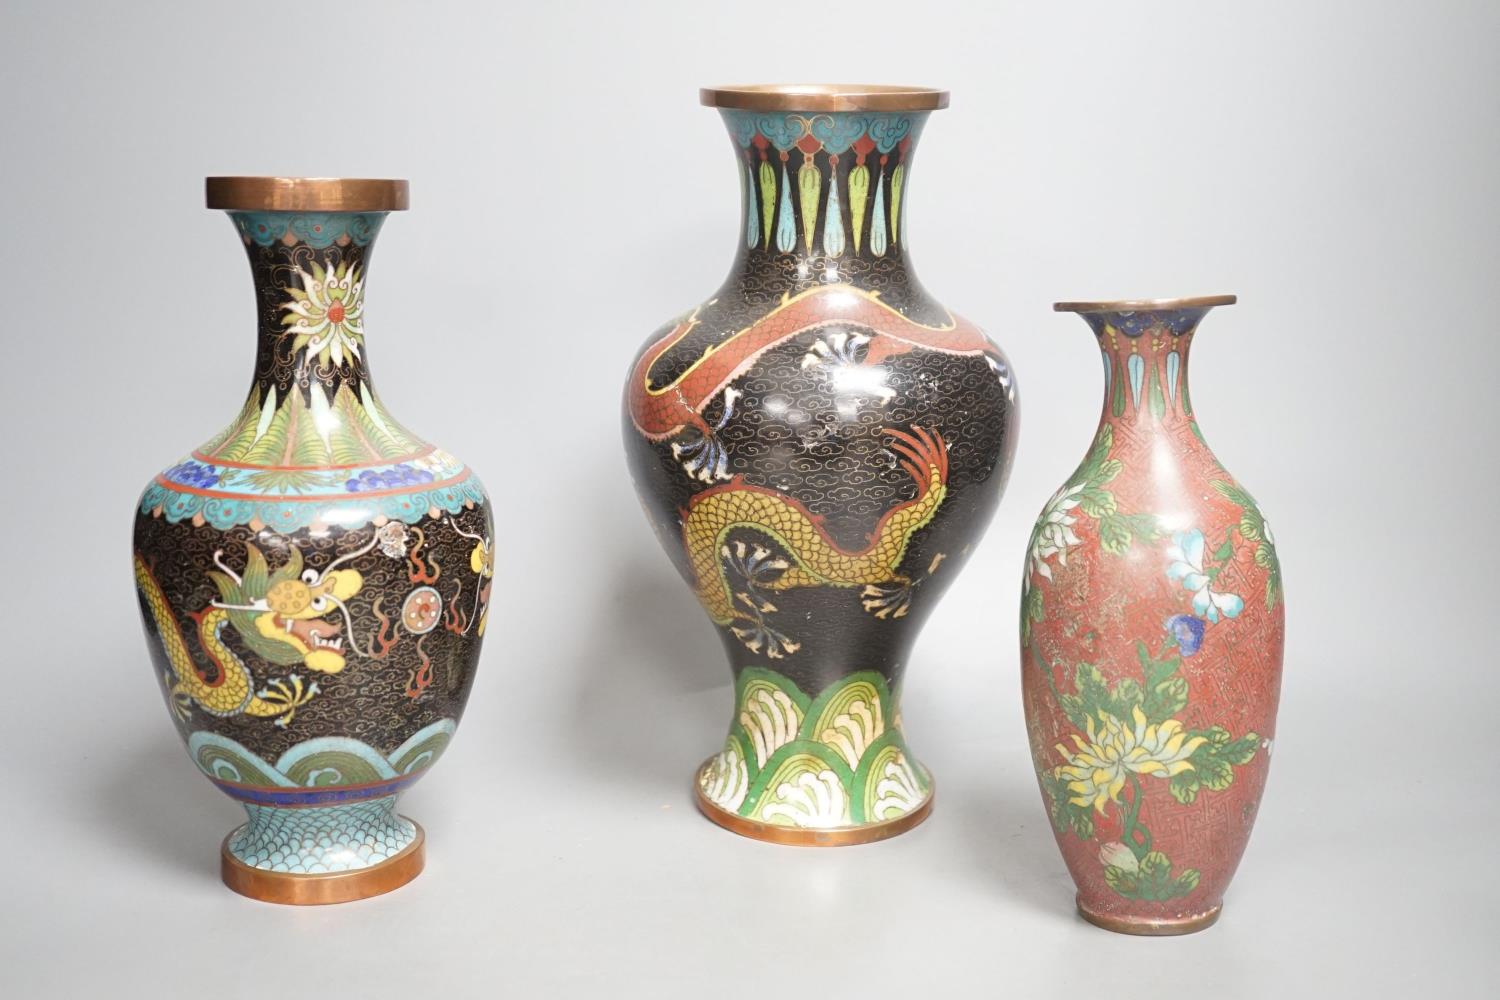 Three Chinese cloisonné enamel vases and a tantric figure of Buddha, tallest 26cm - Image 4 of 6